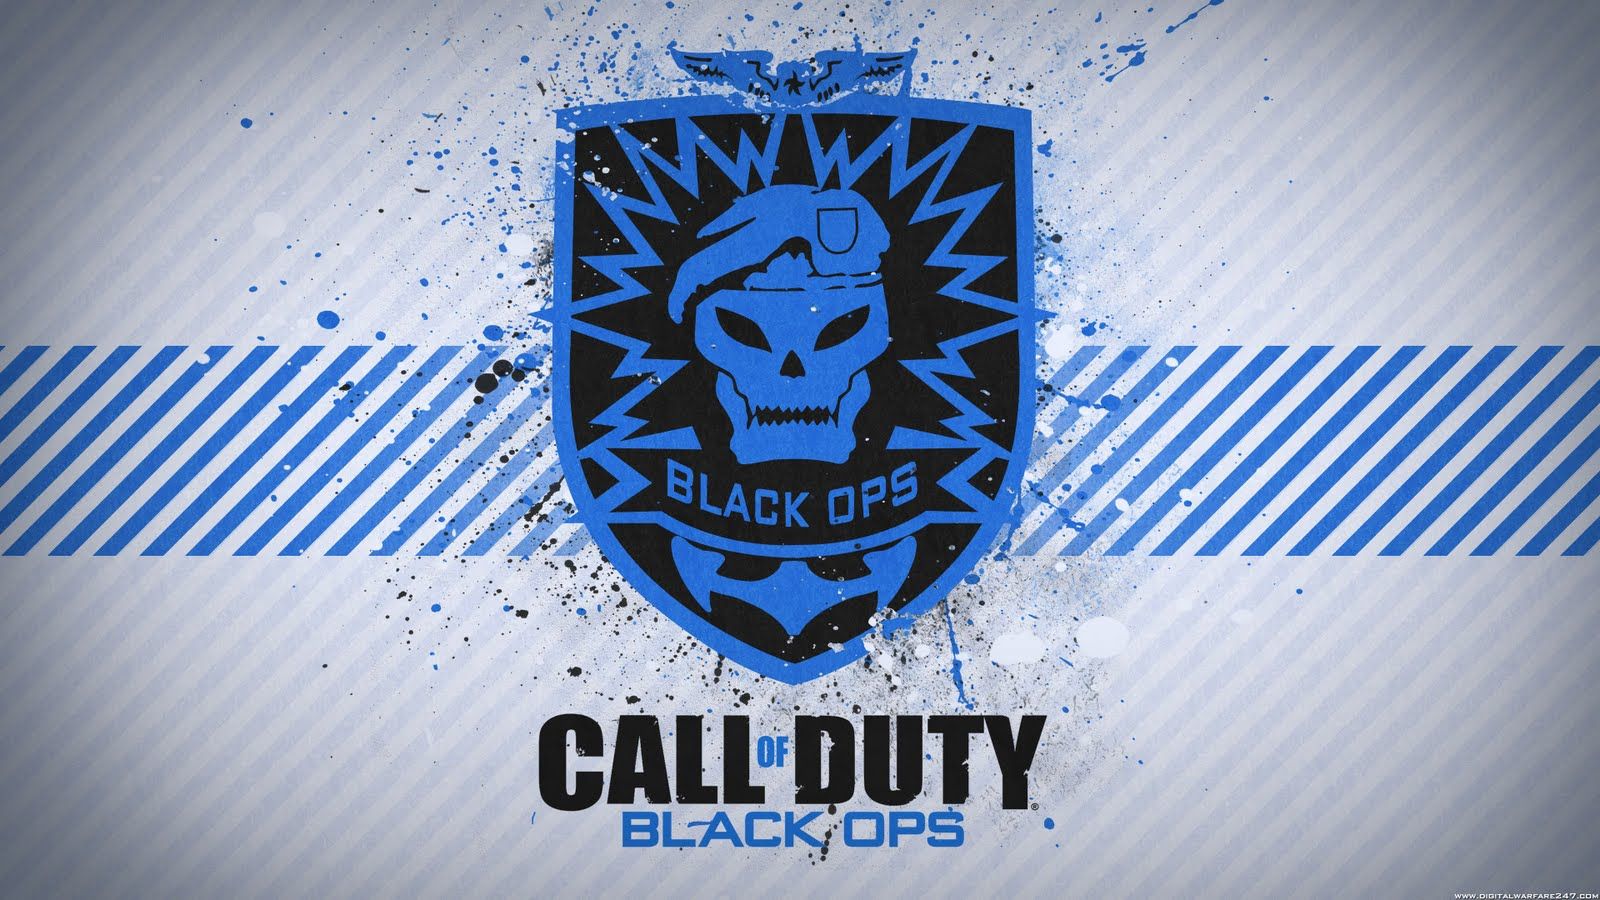 HD WALLPAPERS: Call of Duty Black Ops HD Wallpapers